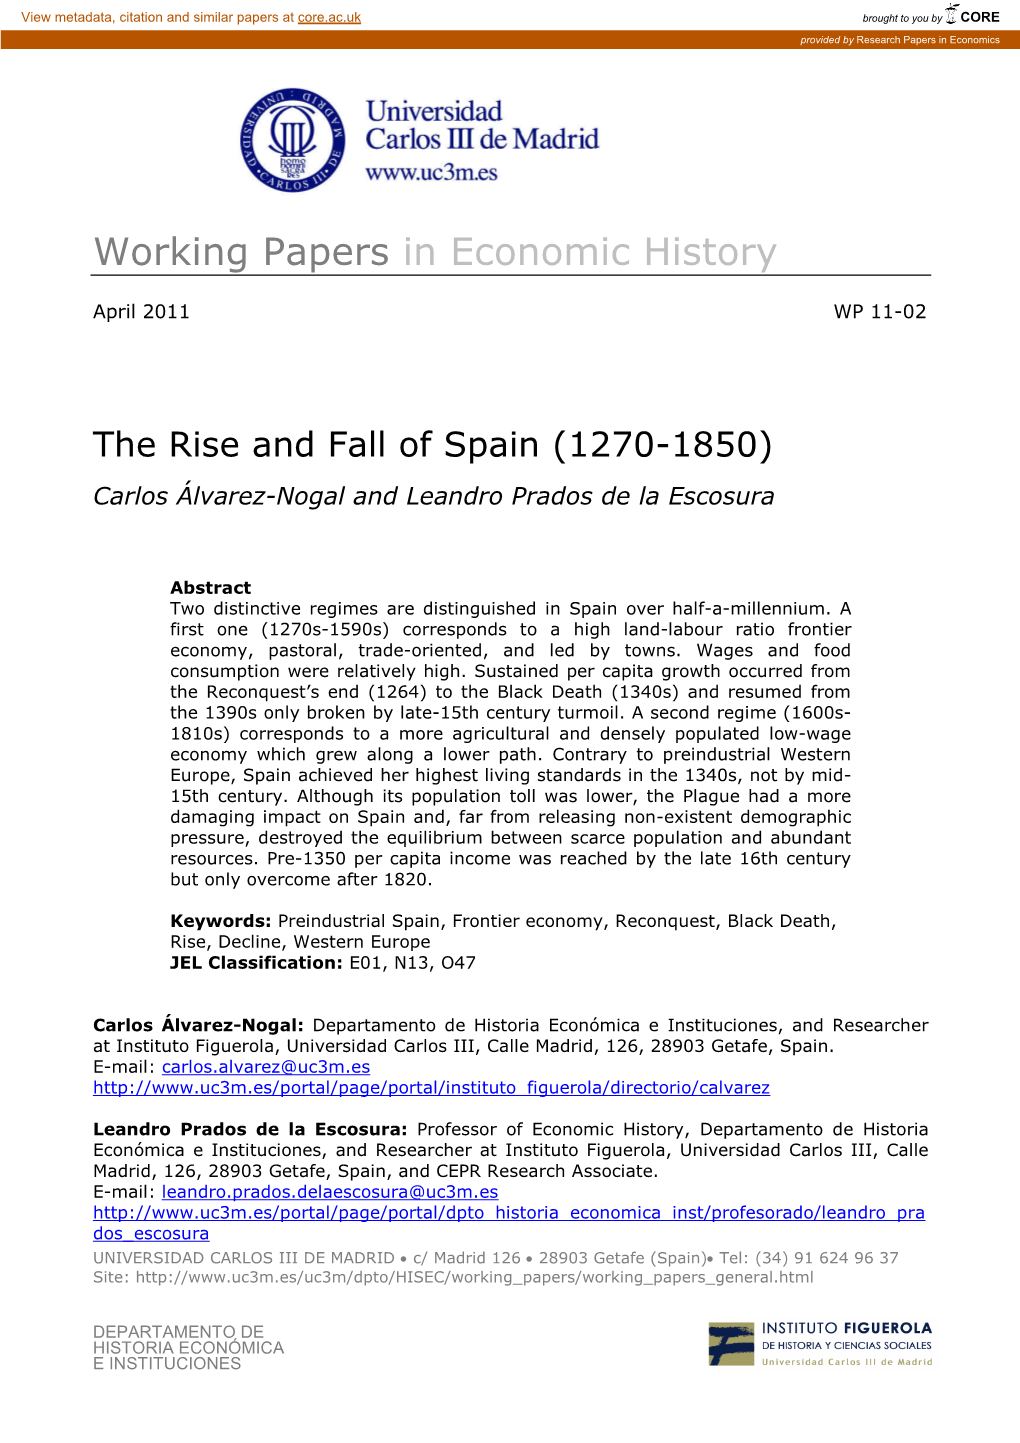 The Rise and Fall of Spain (1270-1850)